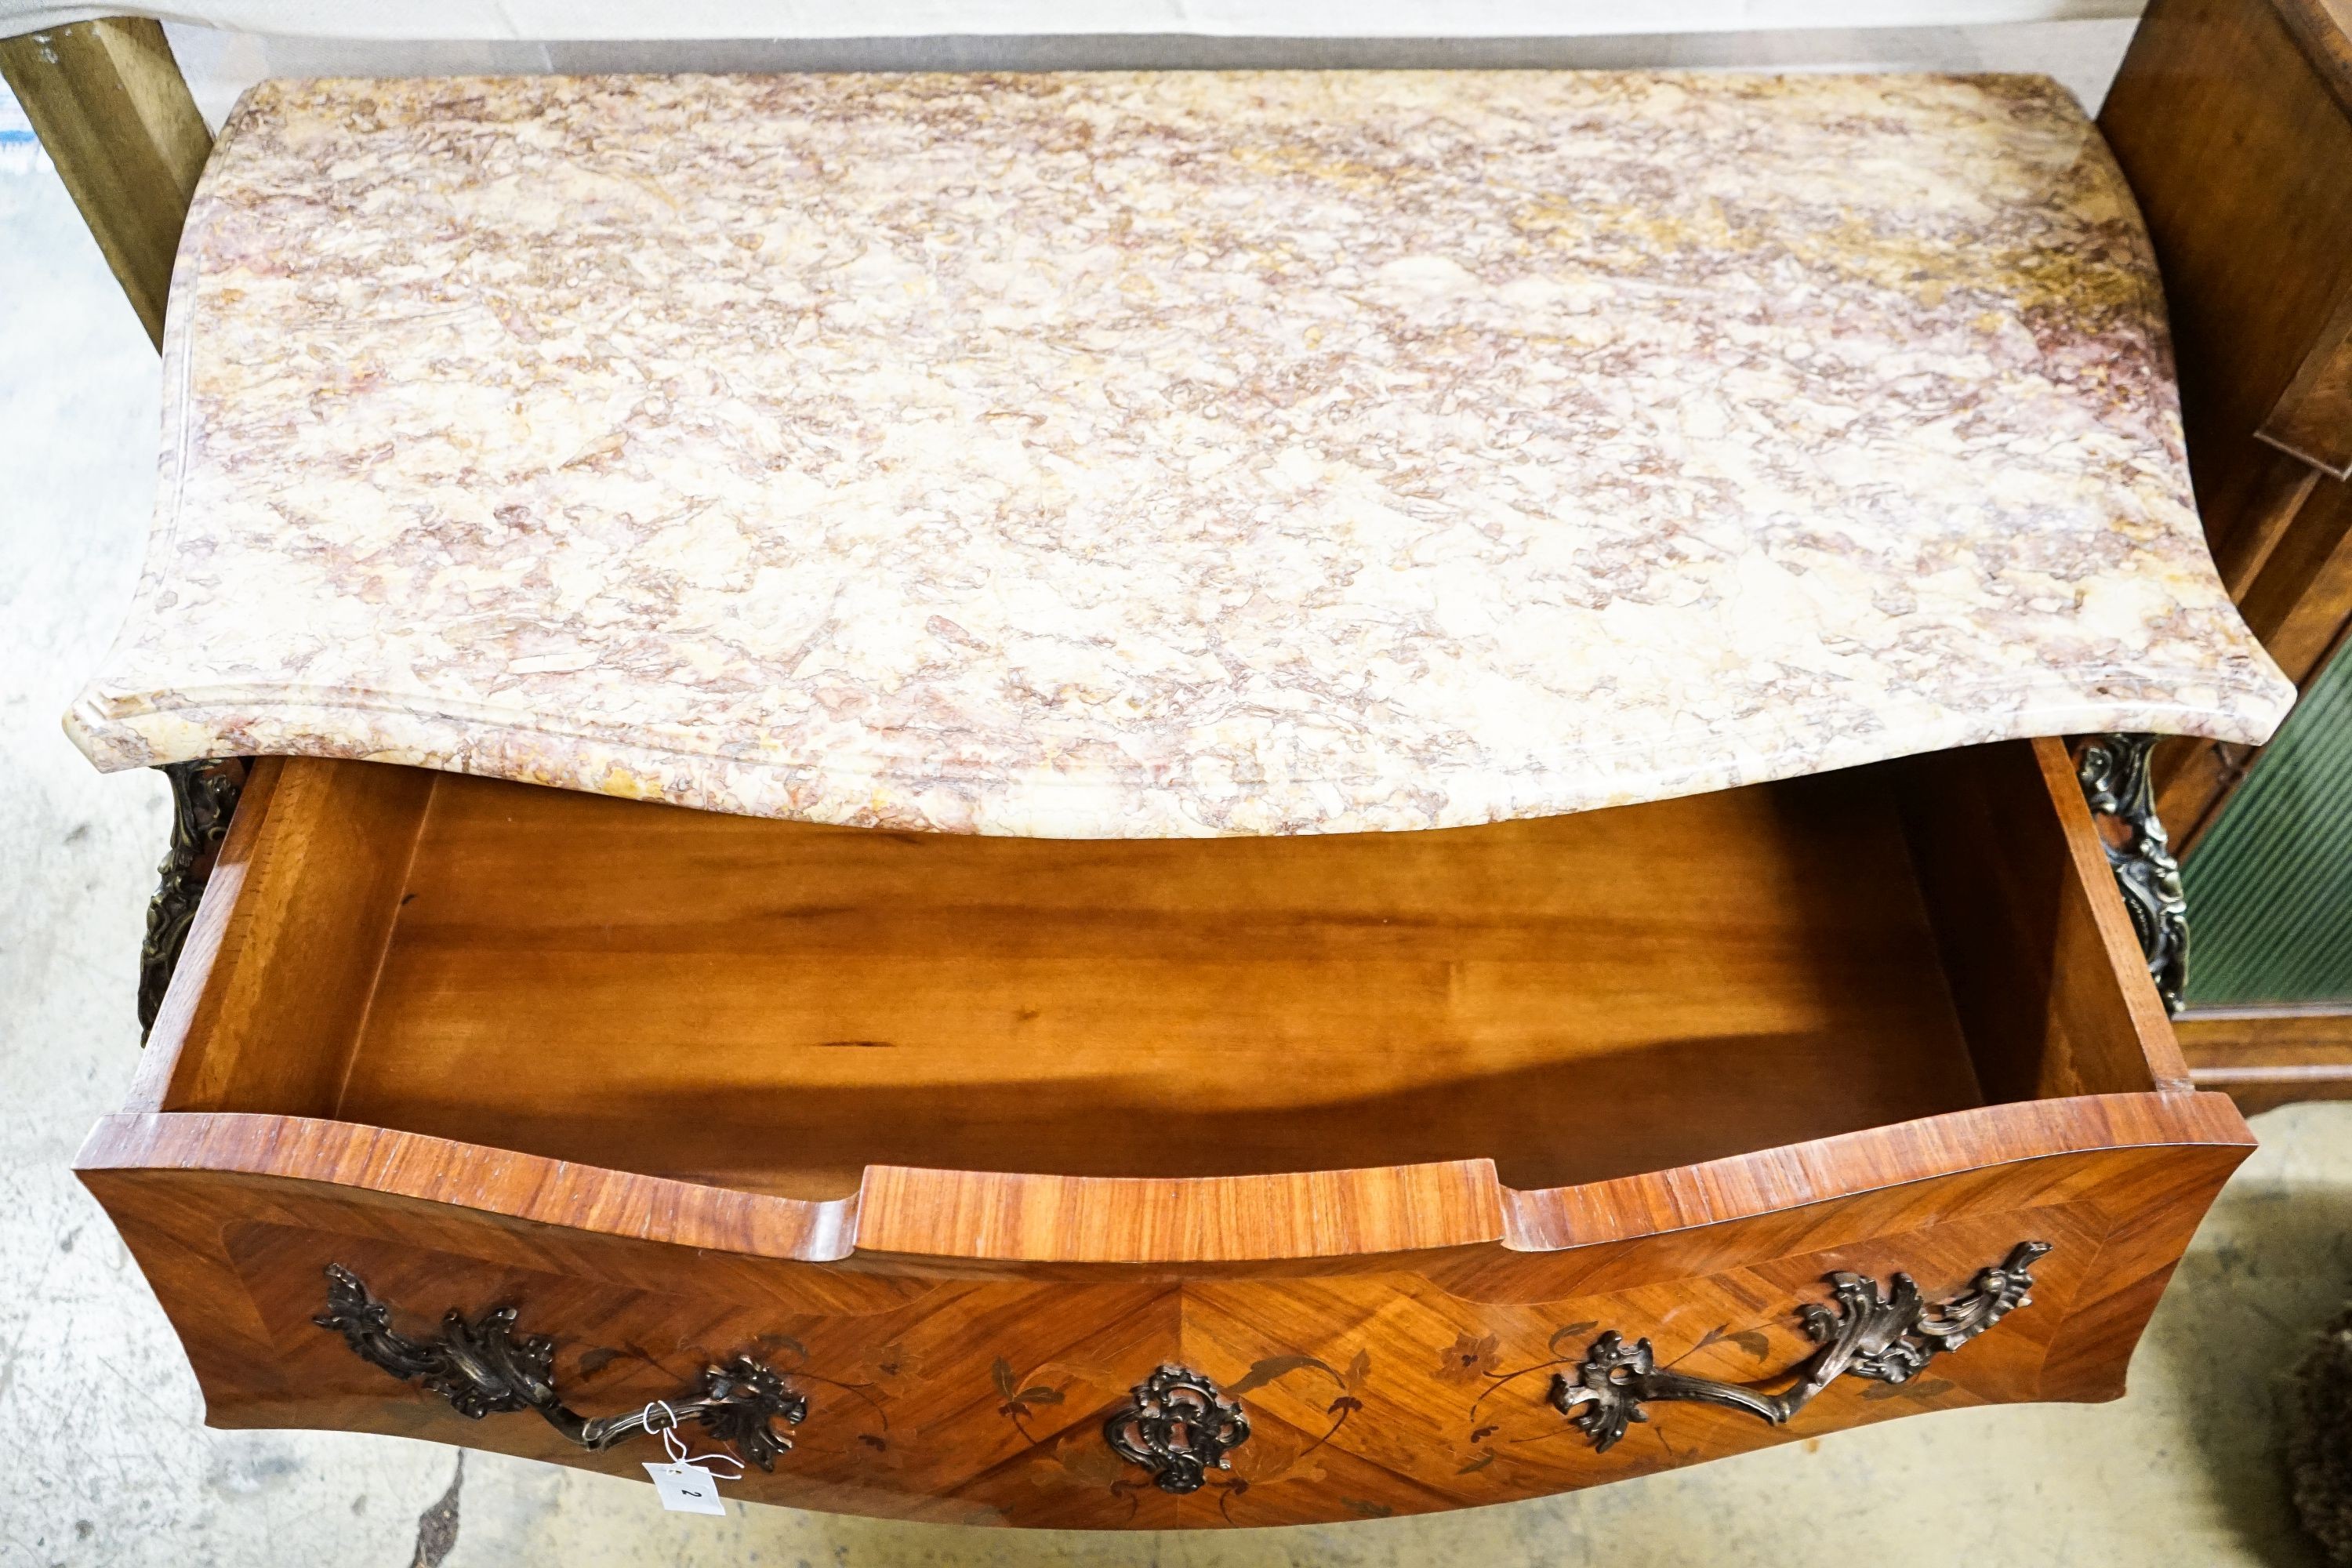 A Louis XV Design marquetry inlaid Kingwood marble top bombe commode, width 120m, depth 64cm, height 84cm